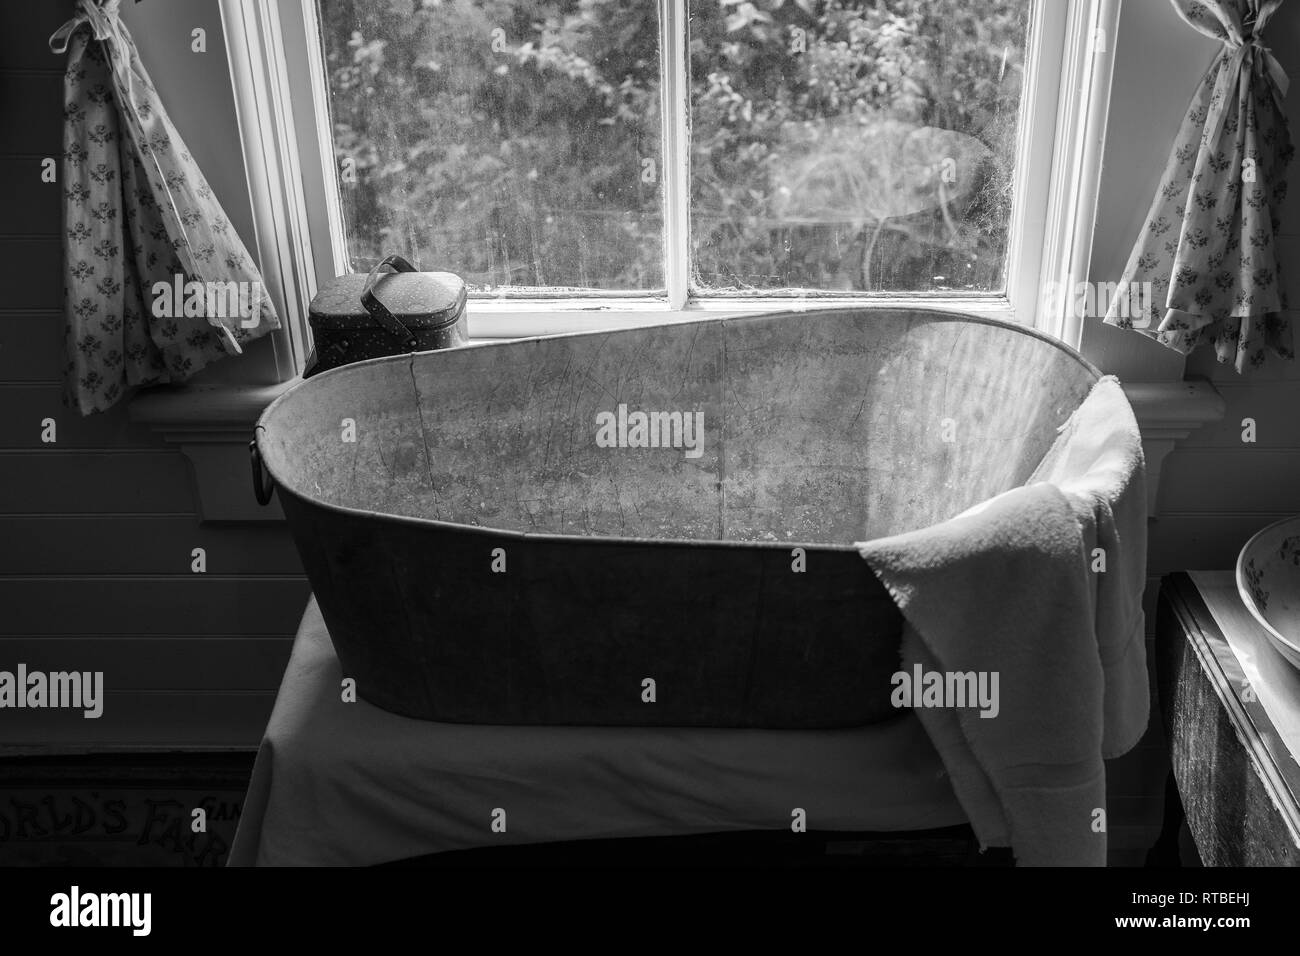 An old school metal bath tub in the window of a house, with a towel draped over the end of the tub, shot in black and white to give a true vintage fee Stock Photo